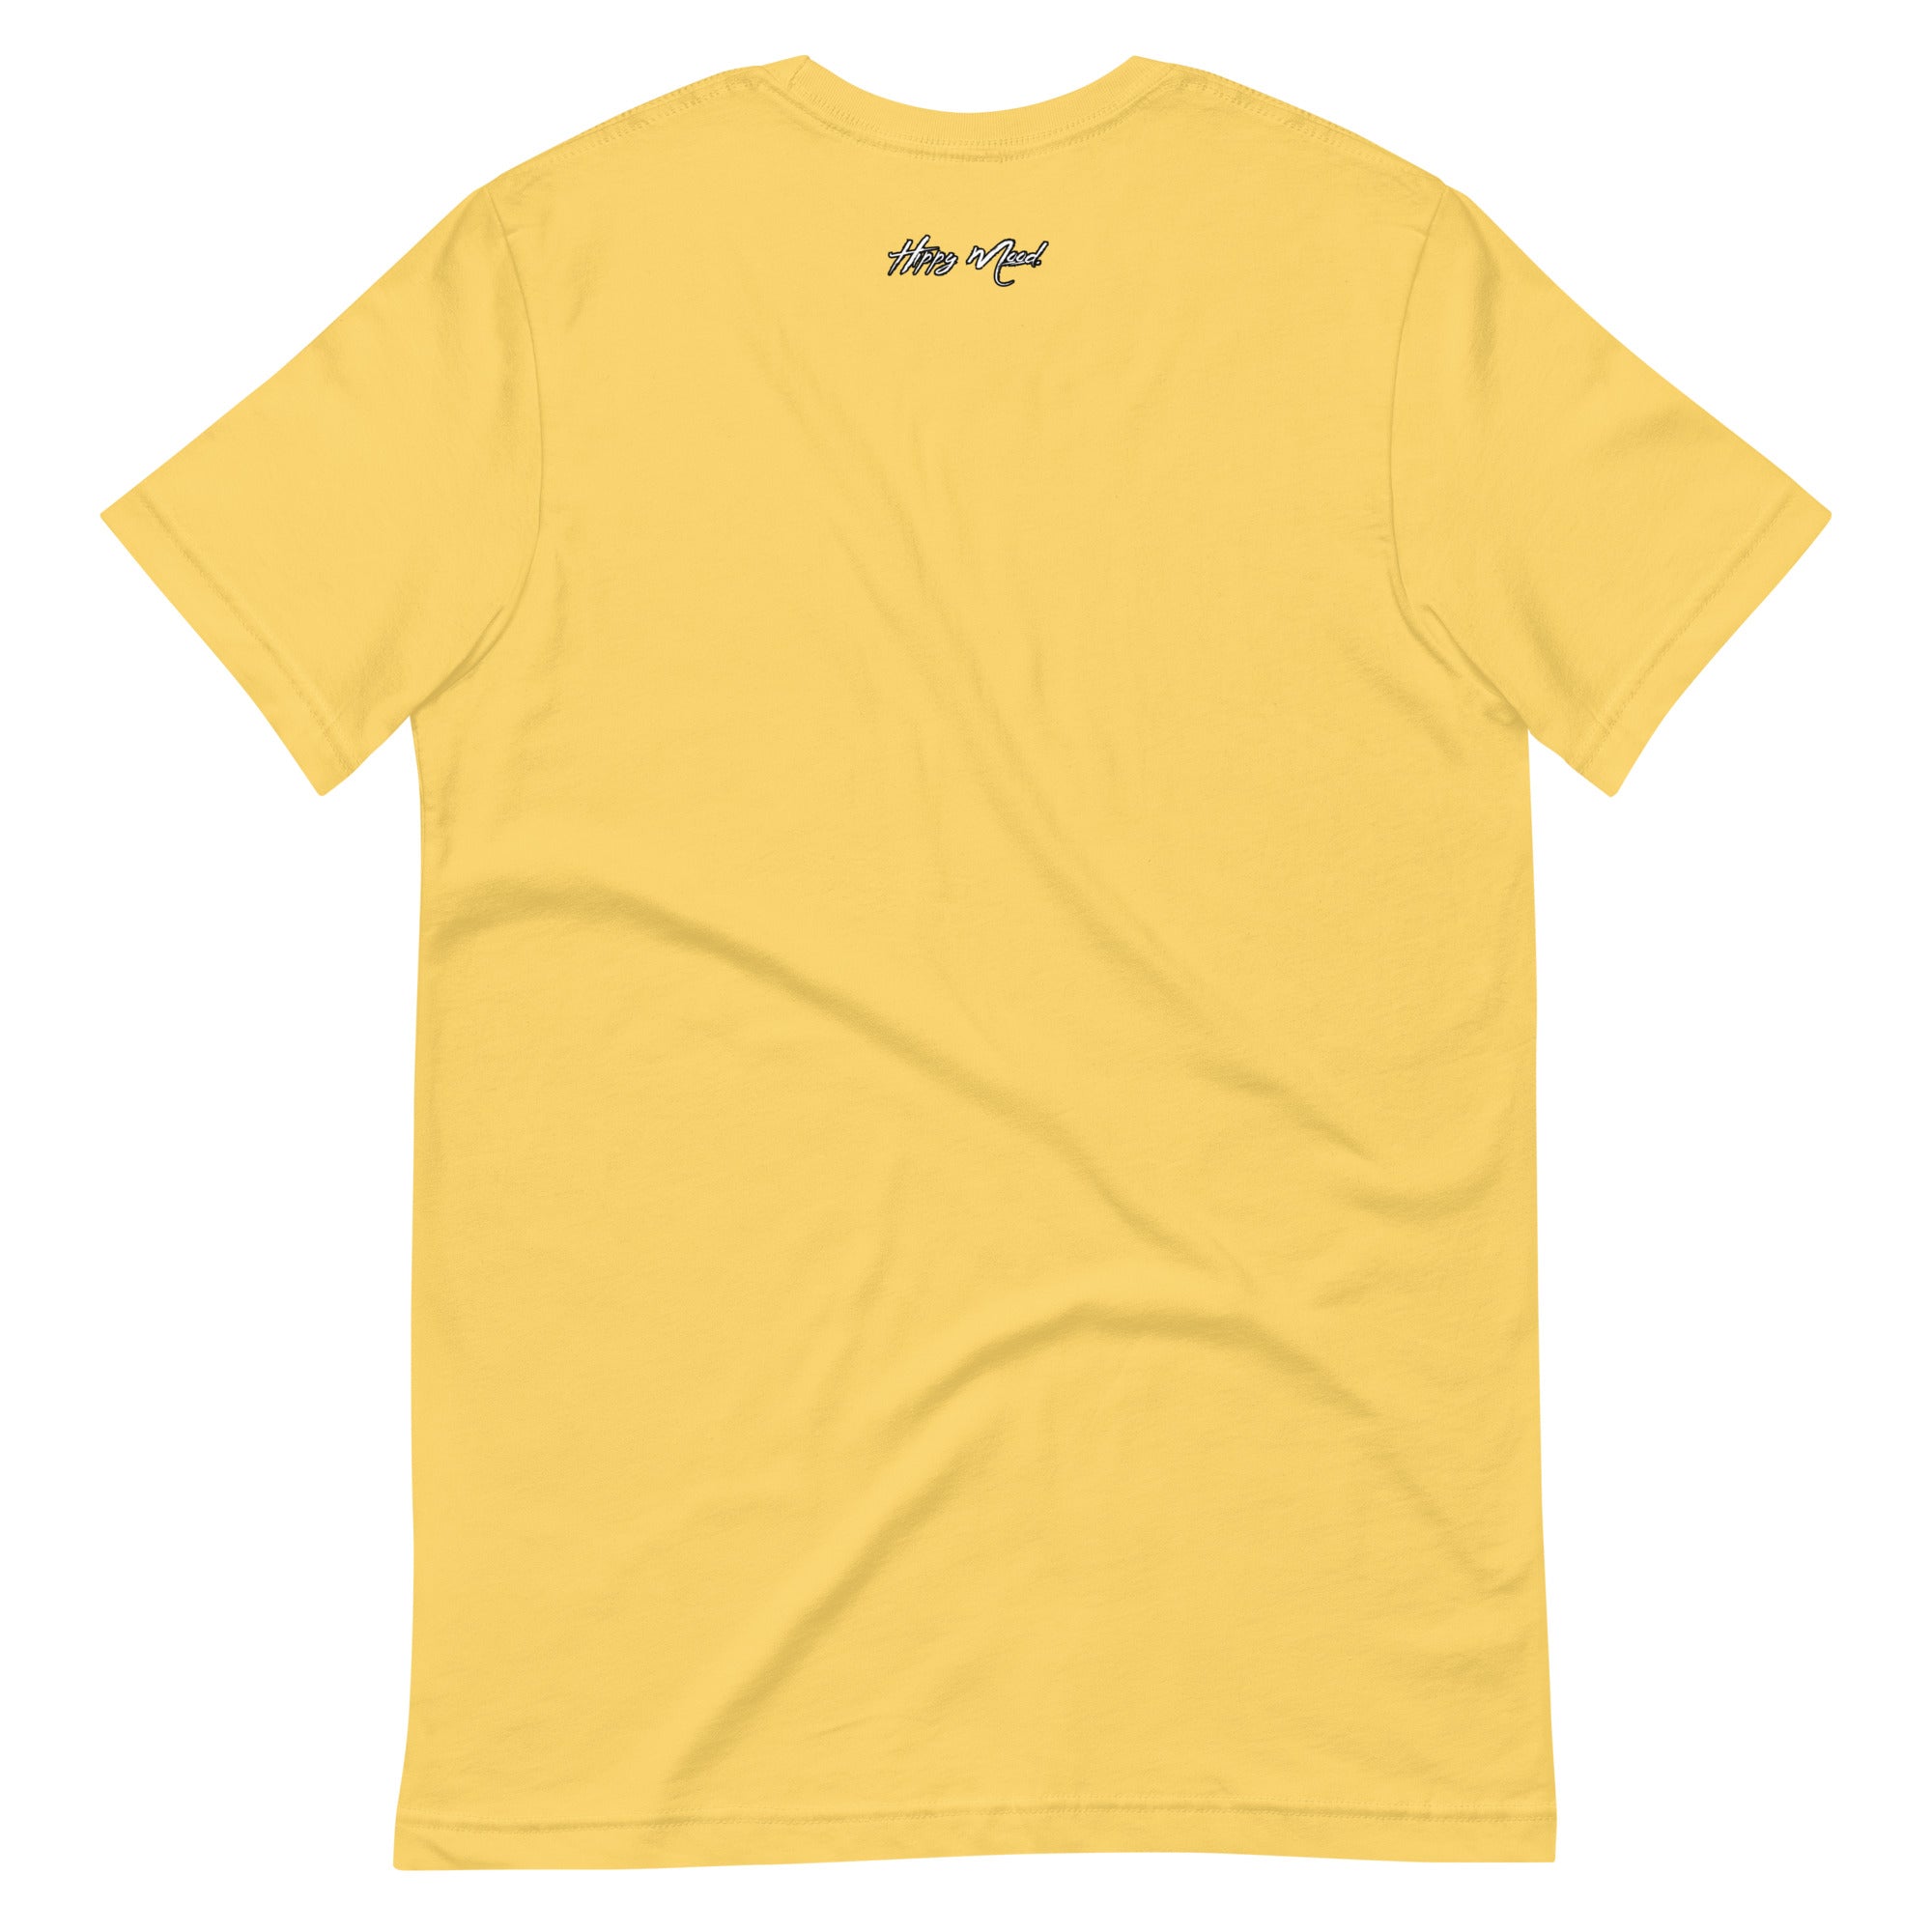 Puffing On The Yacht | Unisex t-shirt